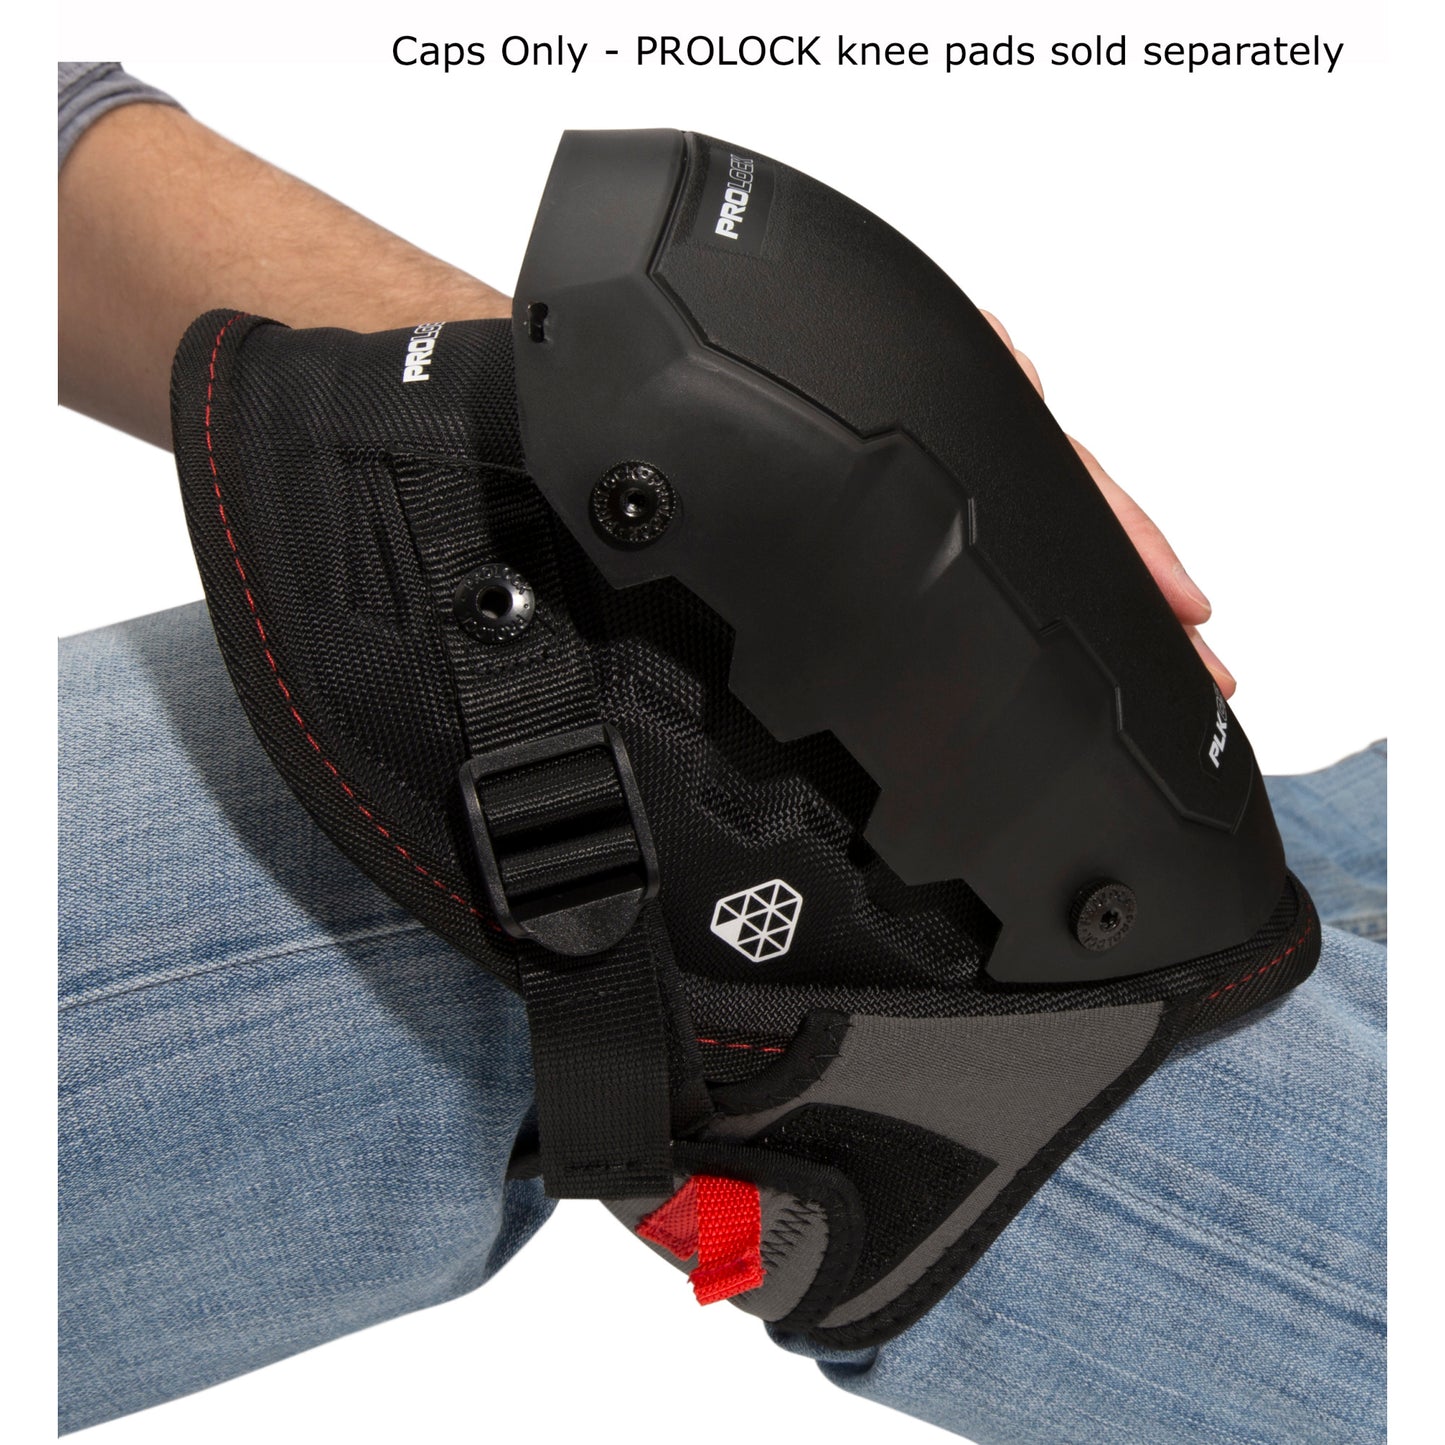 Hard Cap Attachment for PROLOCK Knee Pads (1 pair, caps only)